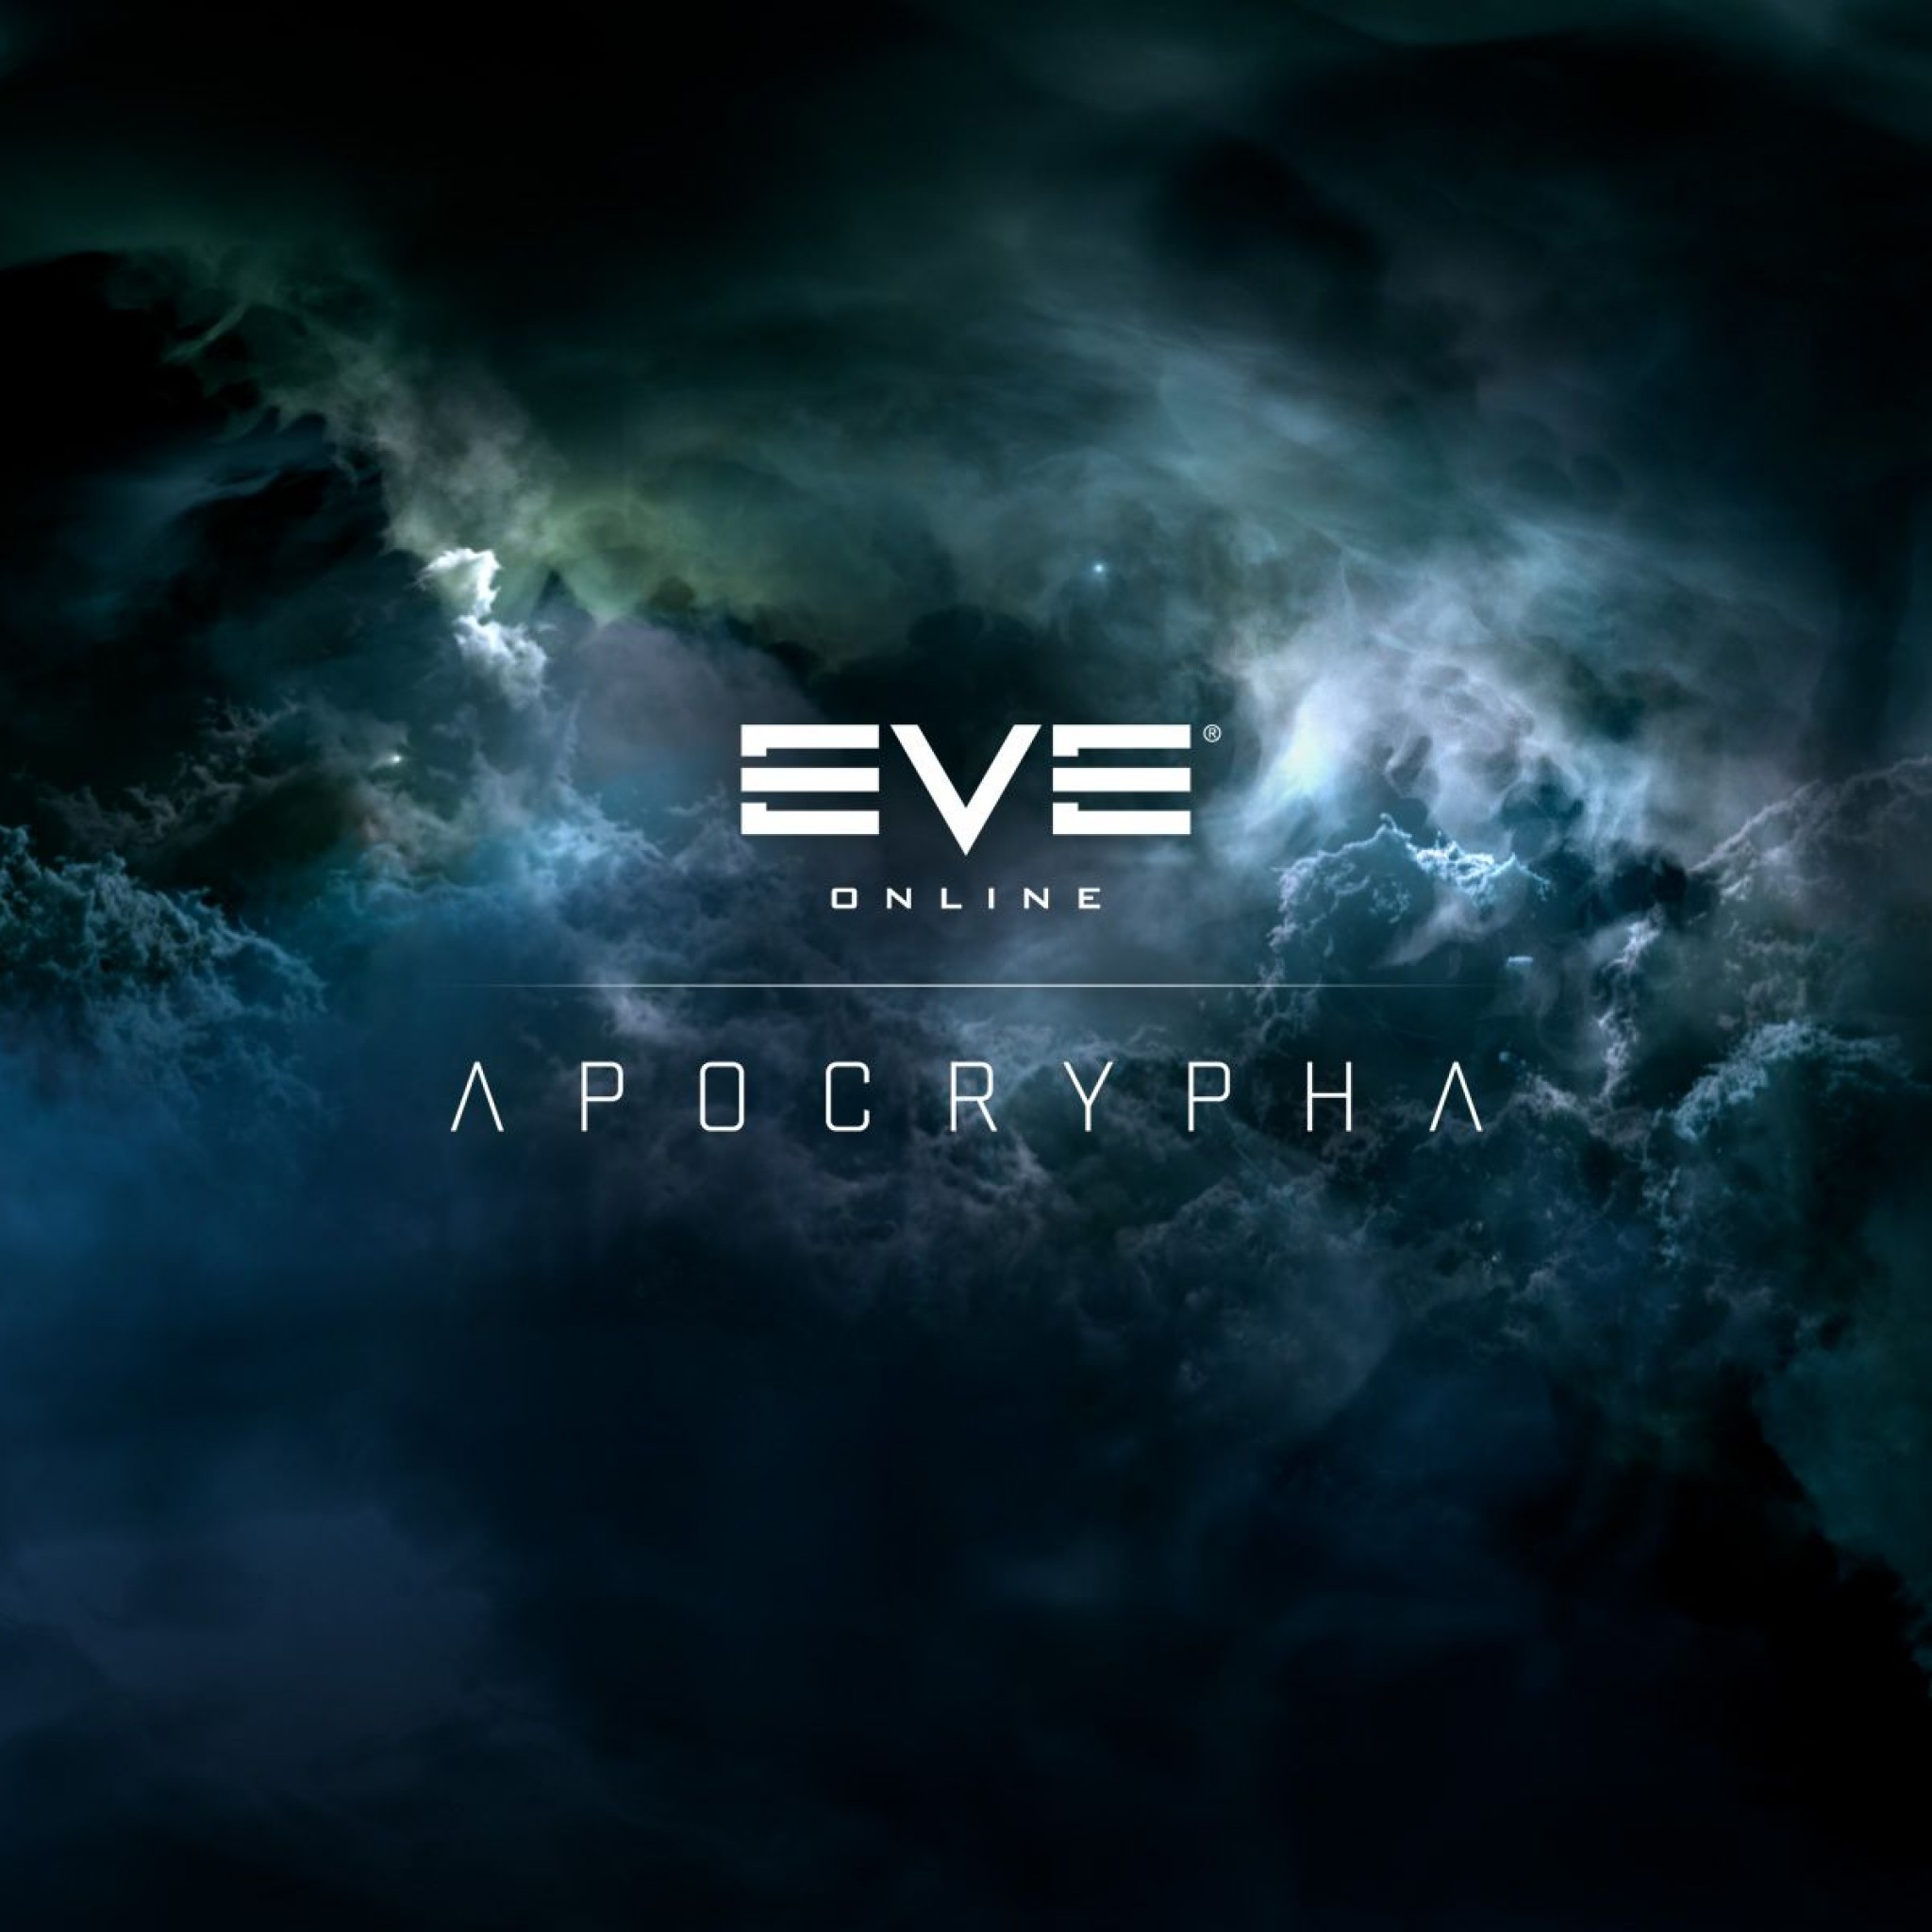 Eve Online Apocrypha Wallpaper Wallpapers Pic Ipad タブレット